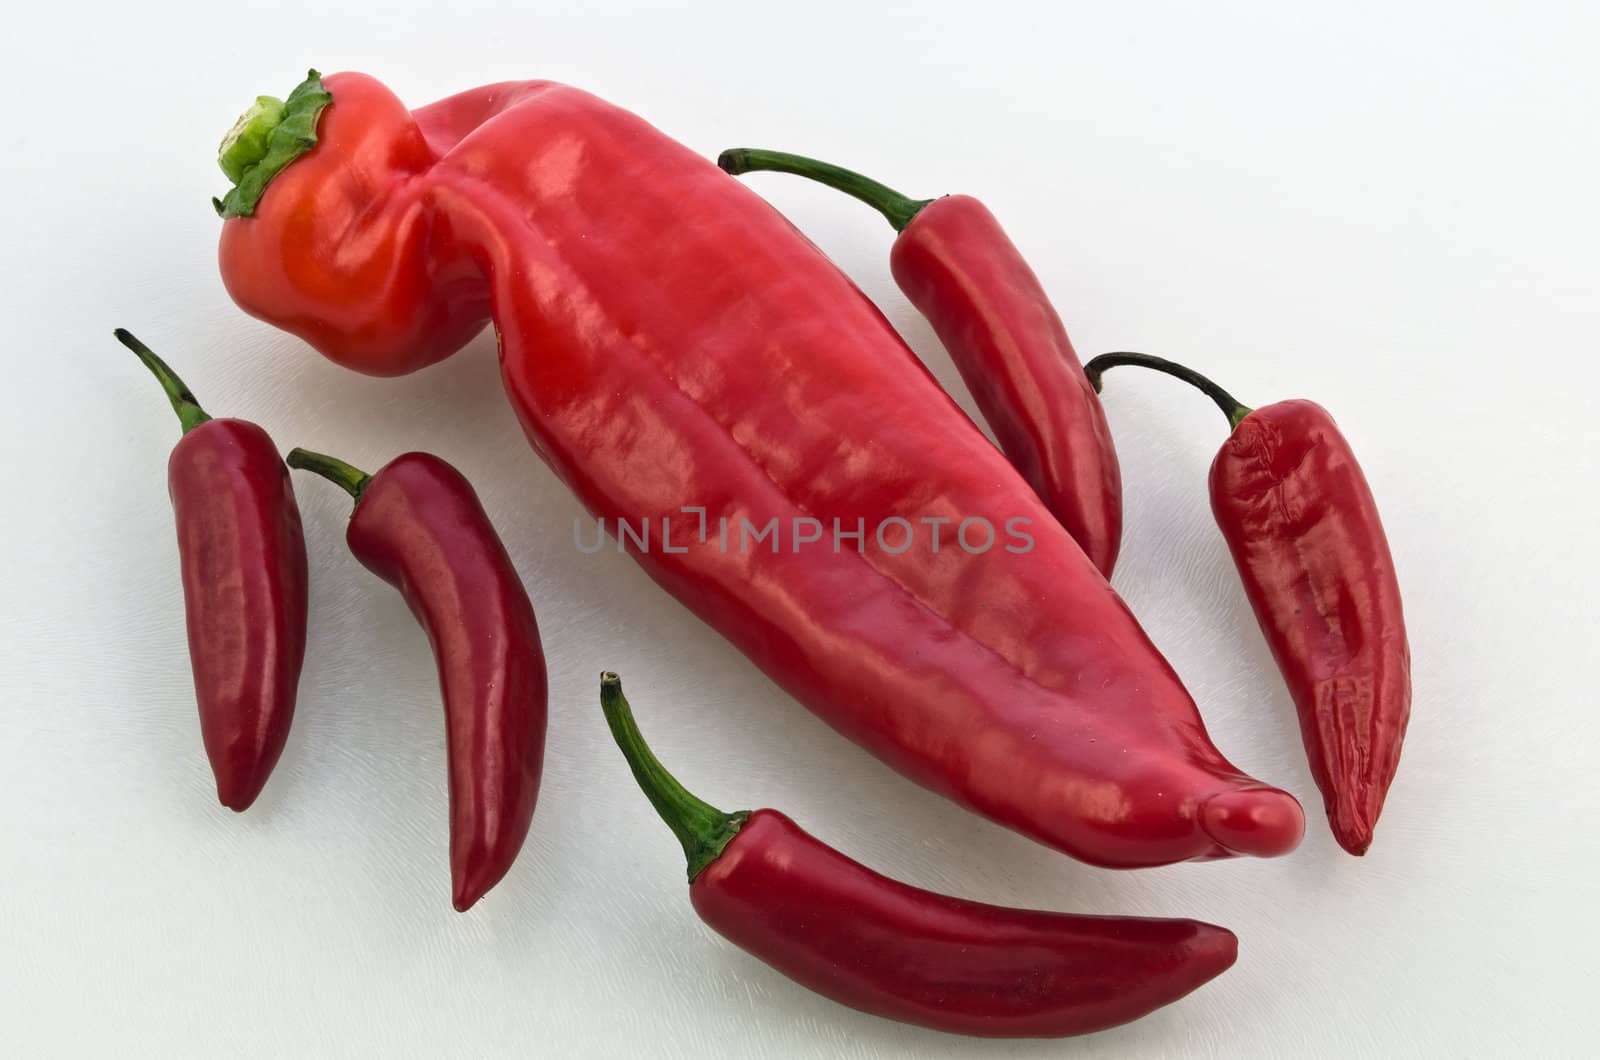 Pointed sweet pepper and chilli peppers